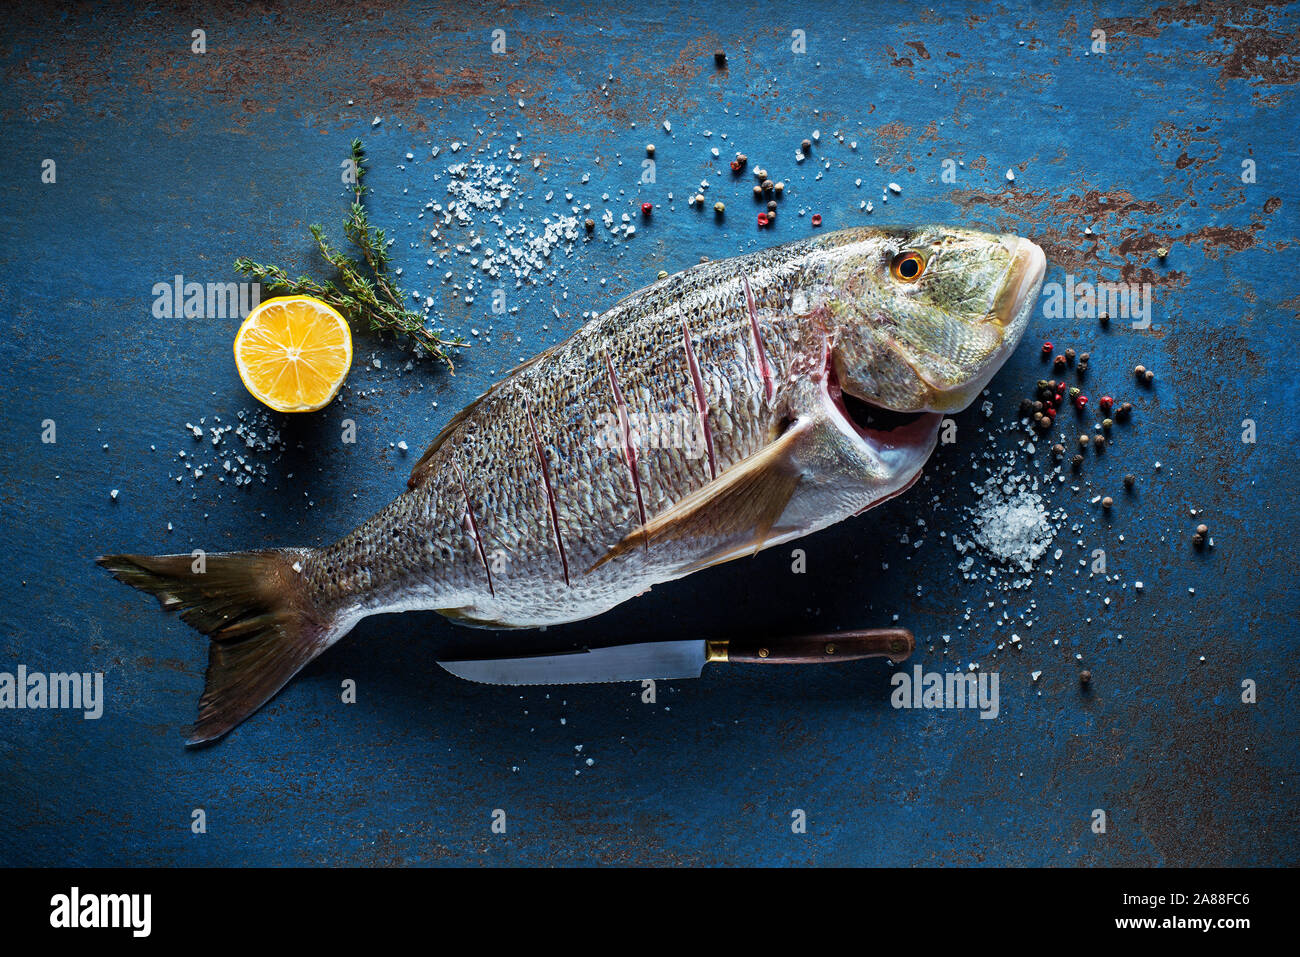 Delicious fresh fish with spices on vintage background. Healthy diet eating or cooking concept Stock Photo